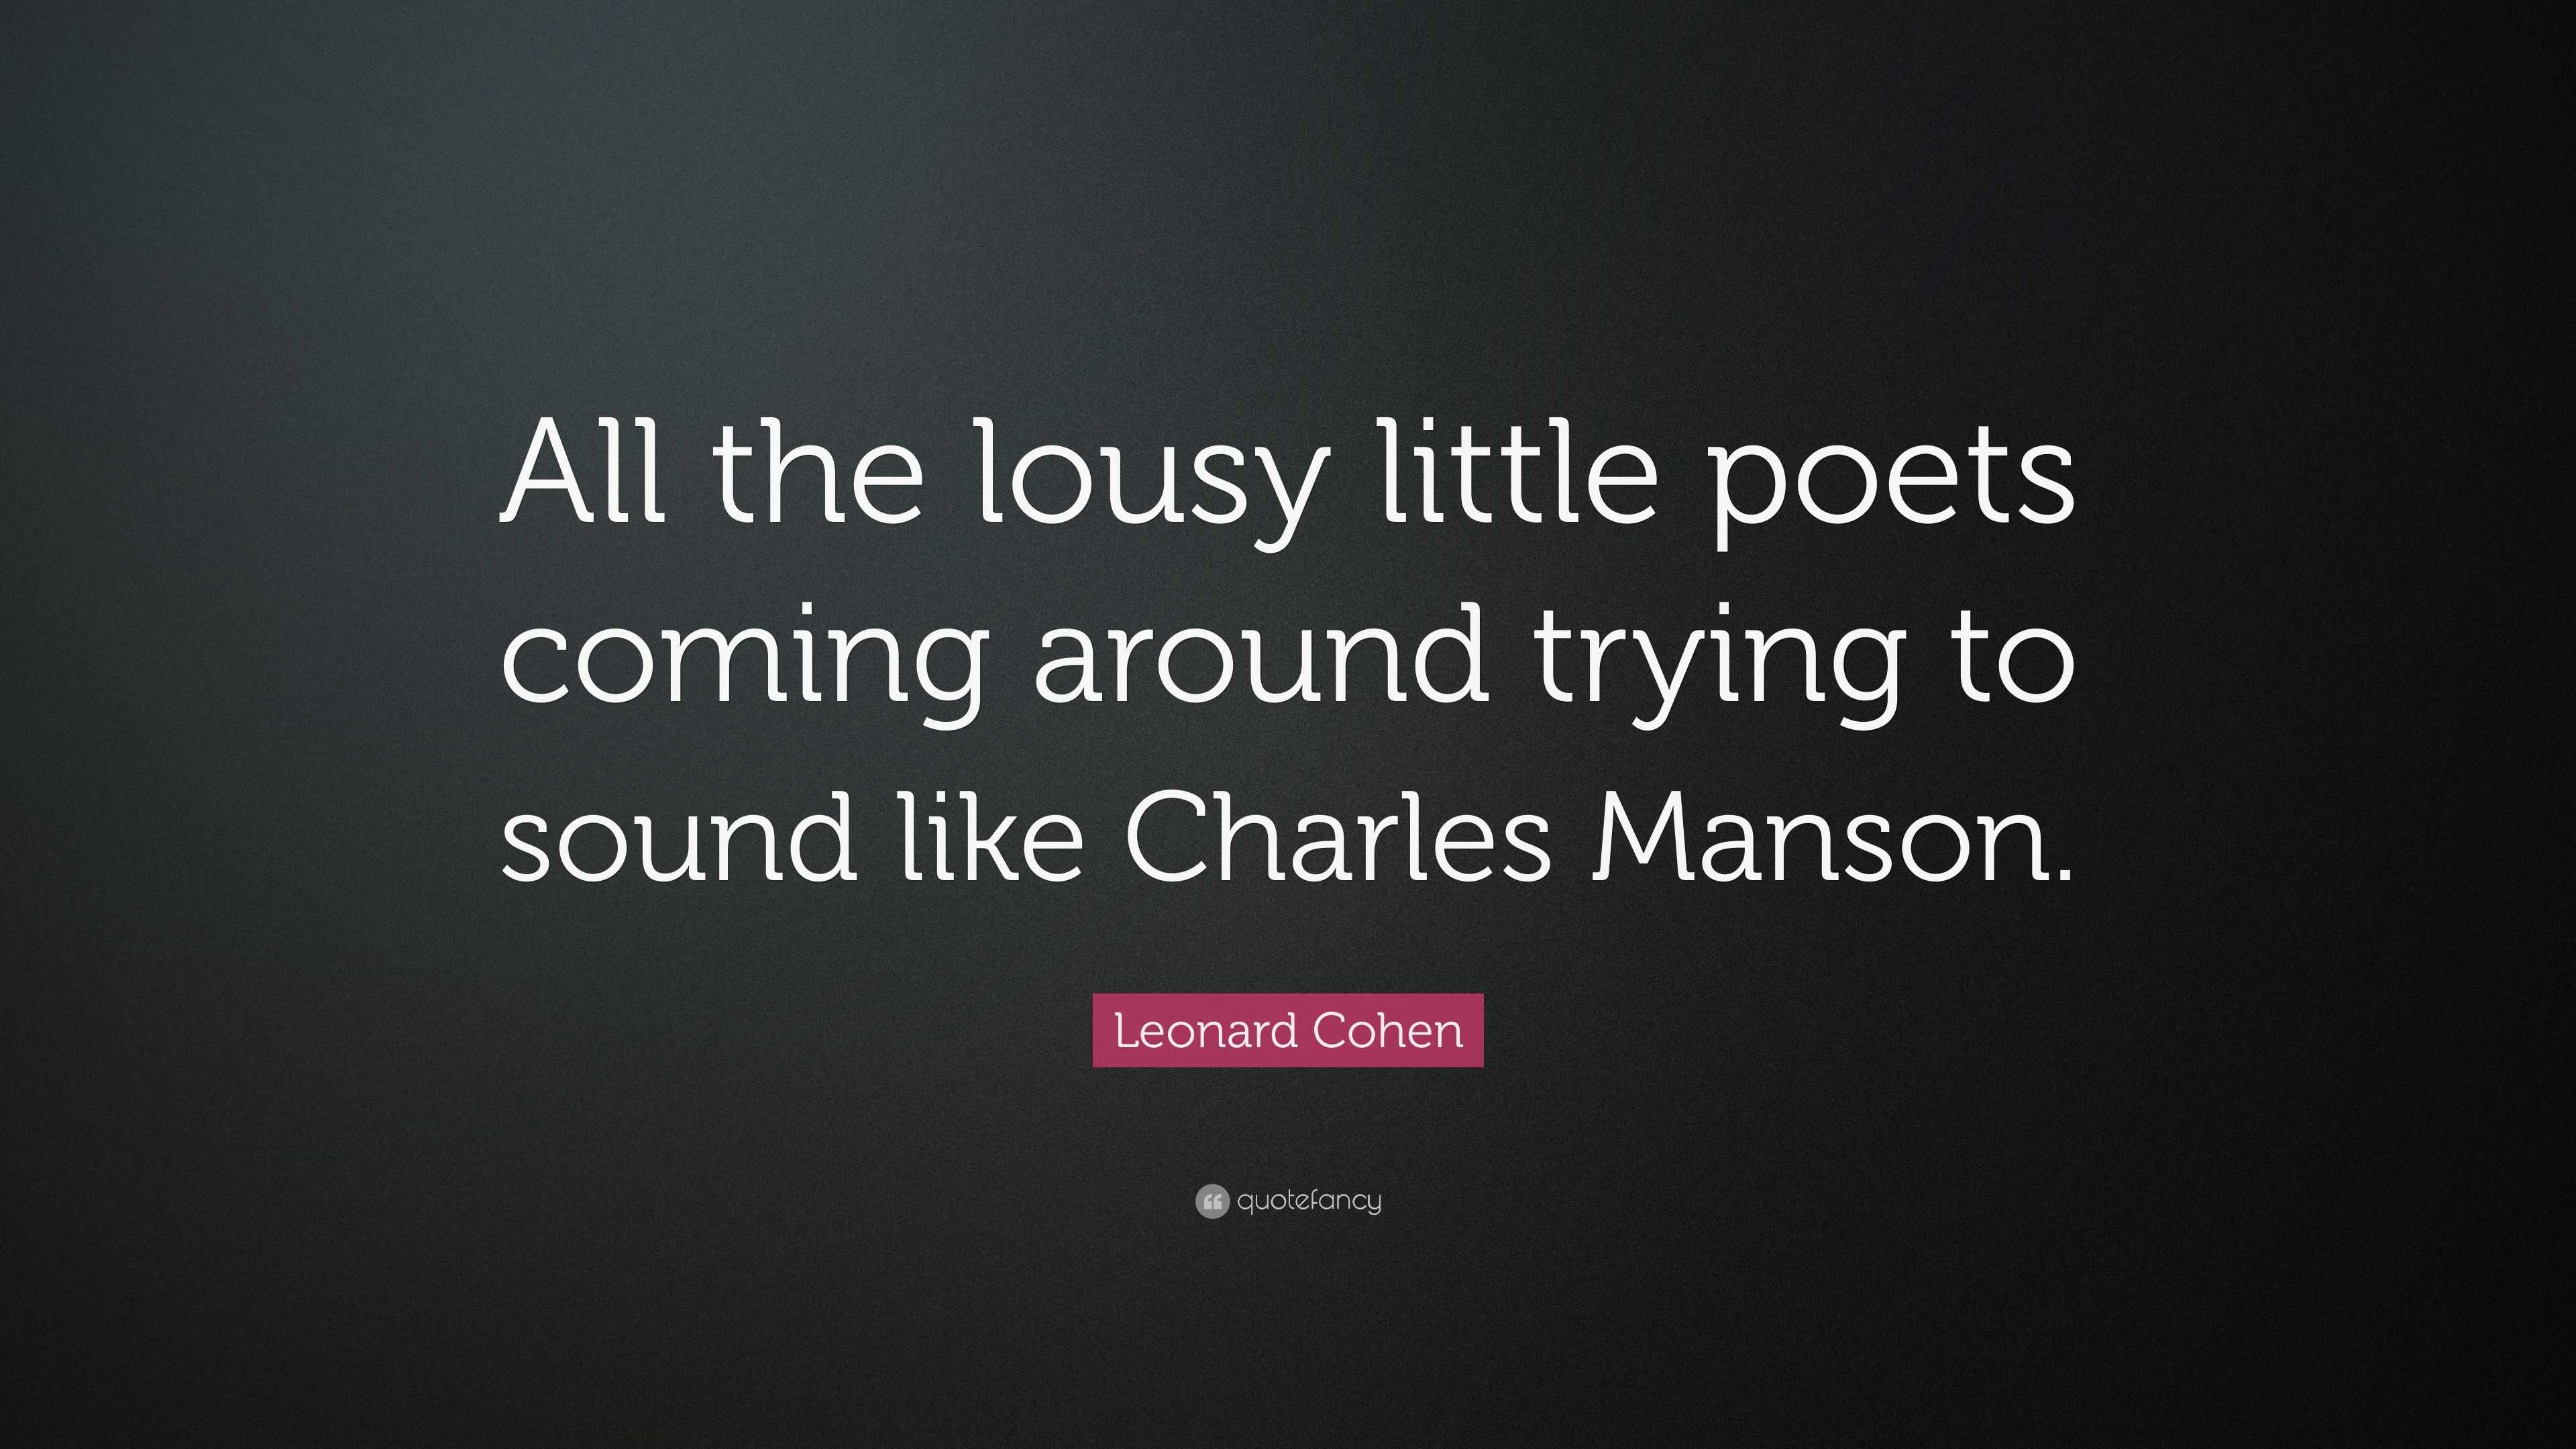 Leonard Cohen Quote: “All the lousy little poets coming around trying ...